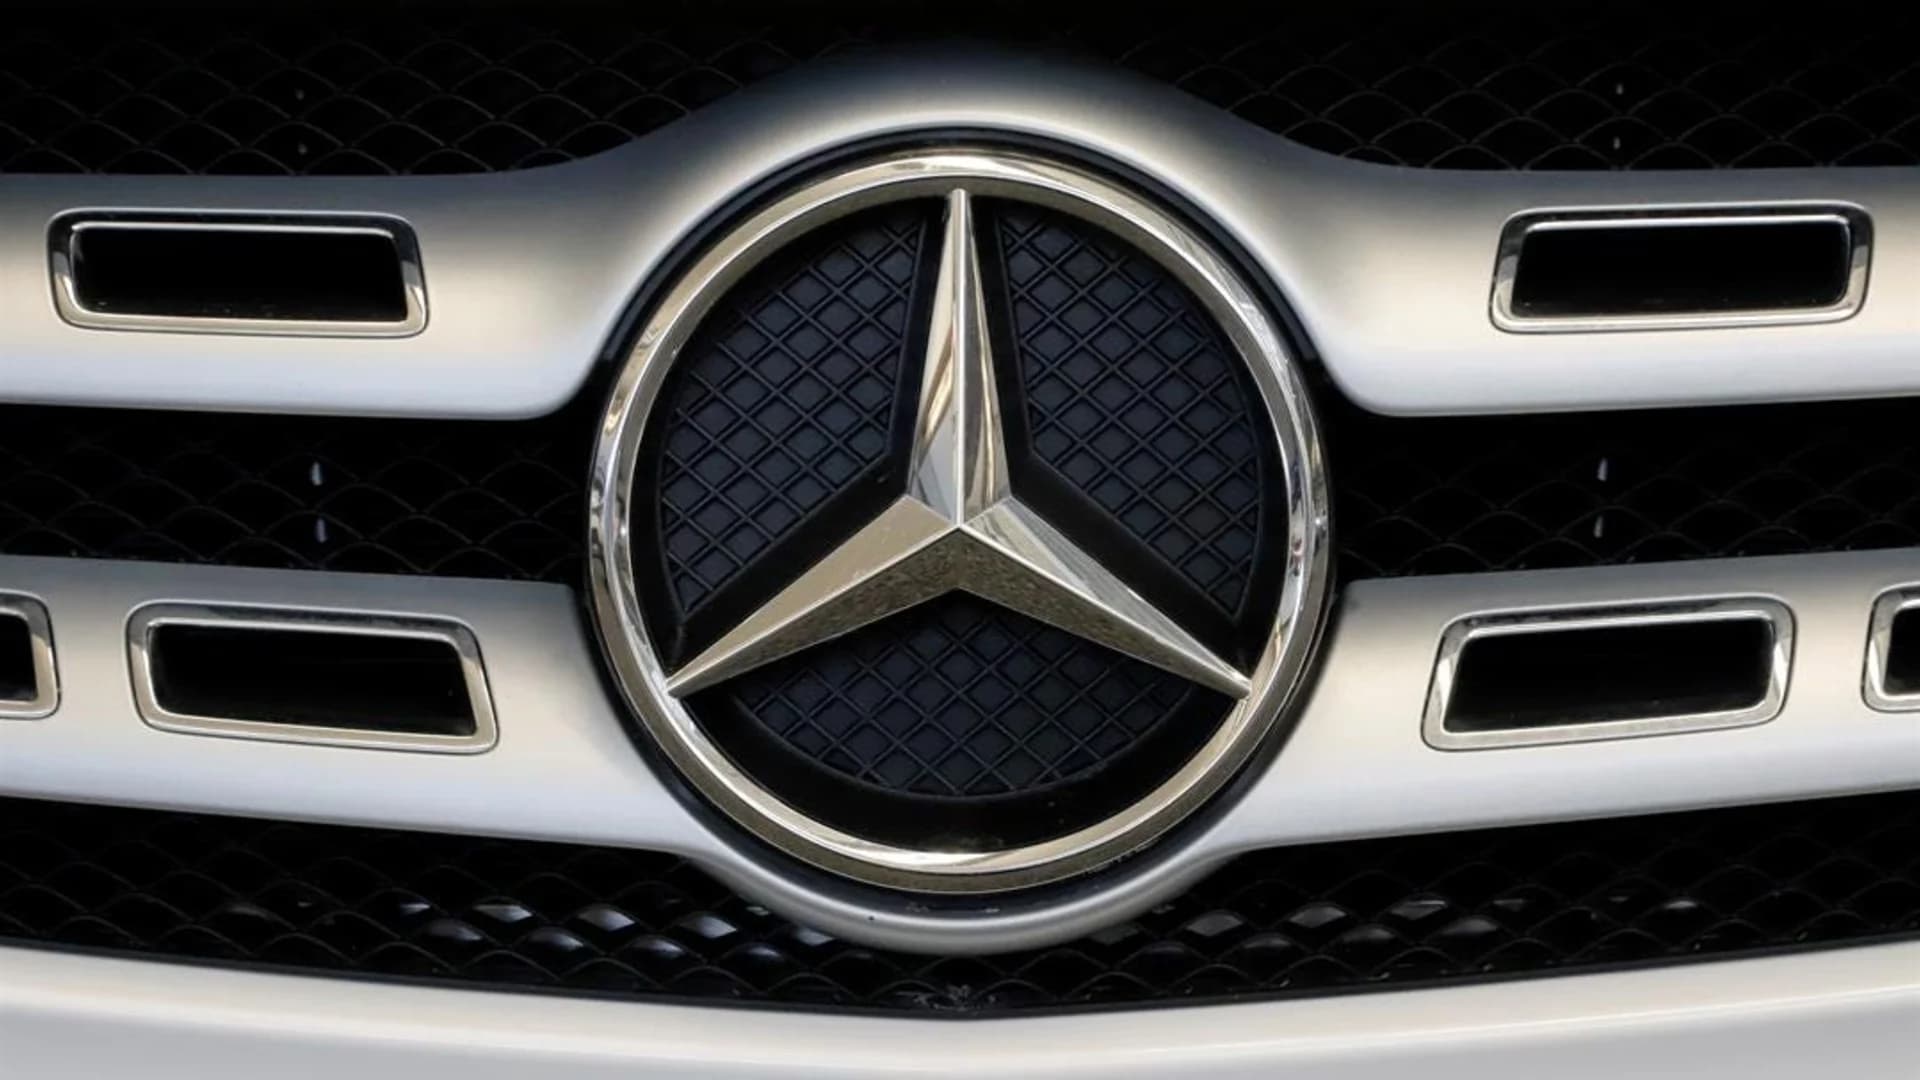 Mercedes recalls 750,000 cars because sunroof can fly off